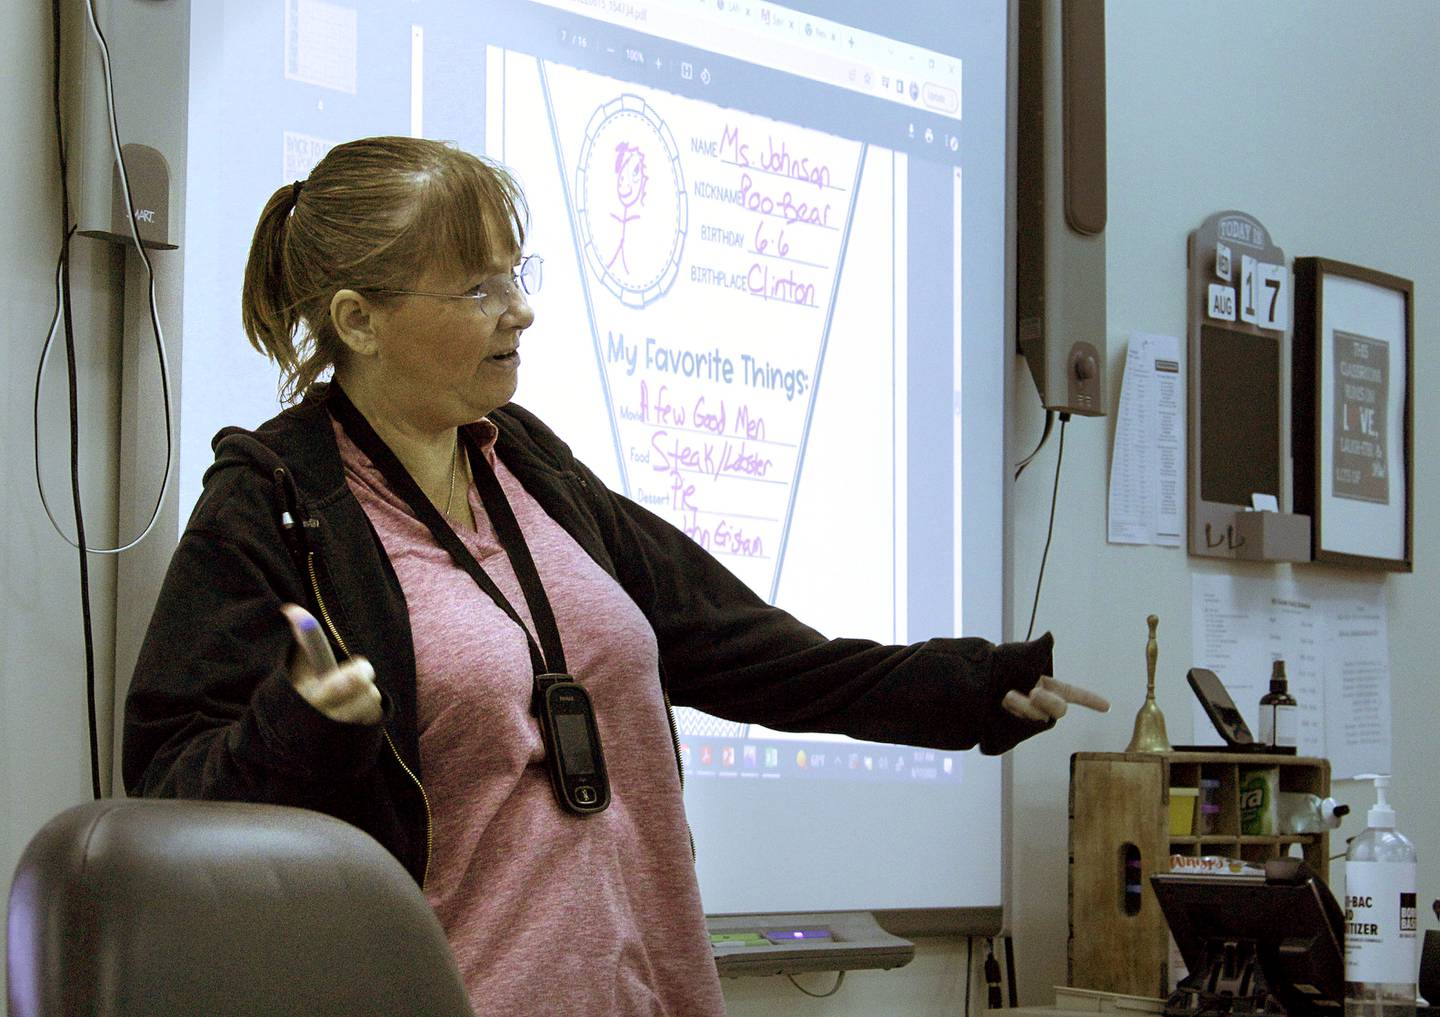 Jennifer Johnson, a teacher of 29 years experience, introduces herself to her class of sixth-graders at West Carroll Middle School on Wednesday. It's her first year as a sixth-grade instructor after being a special education specialist last year. The room's lighting is tinted to accommodate special education students.